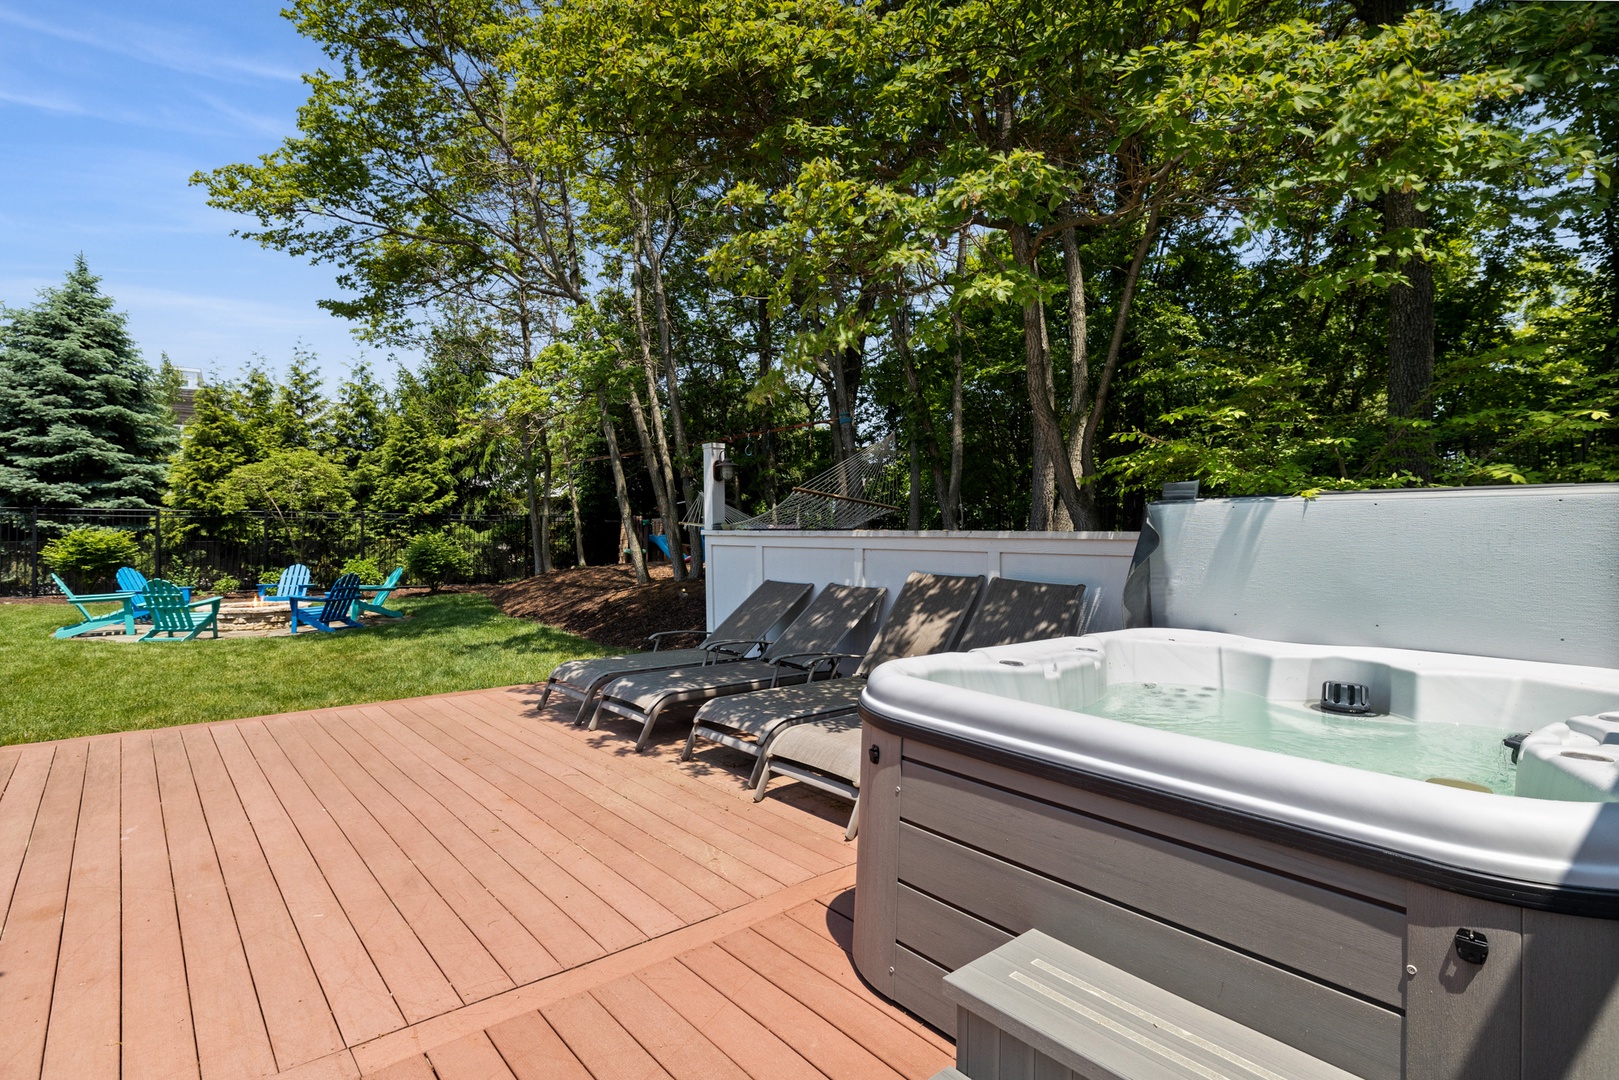 Surrounded by lush greenery, the hot tub offers a peaceful spot to relax and unwind.